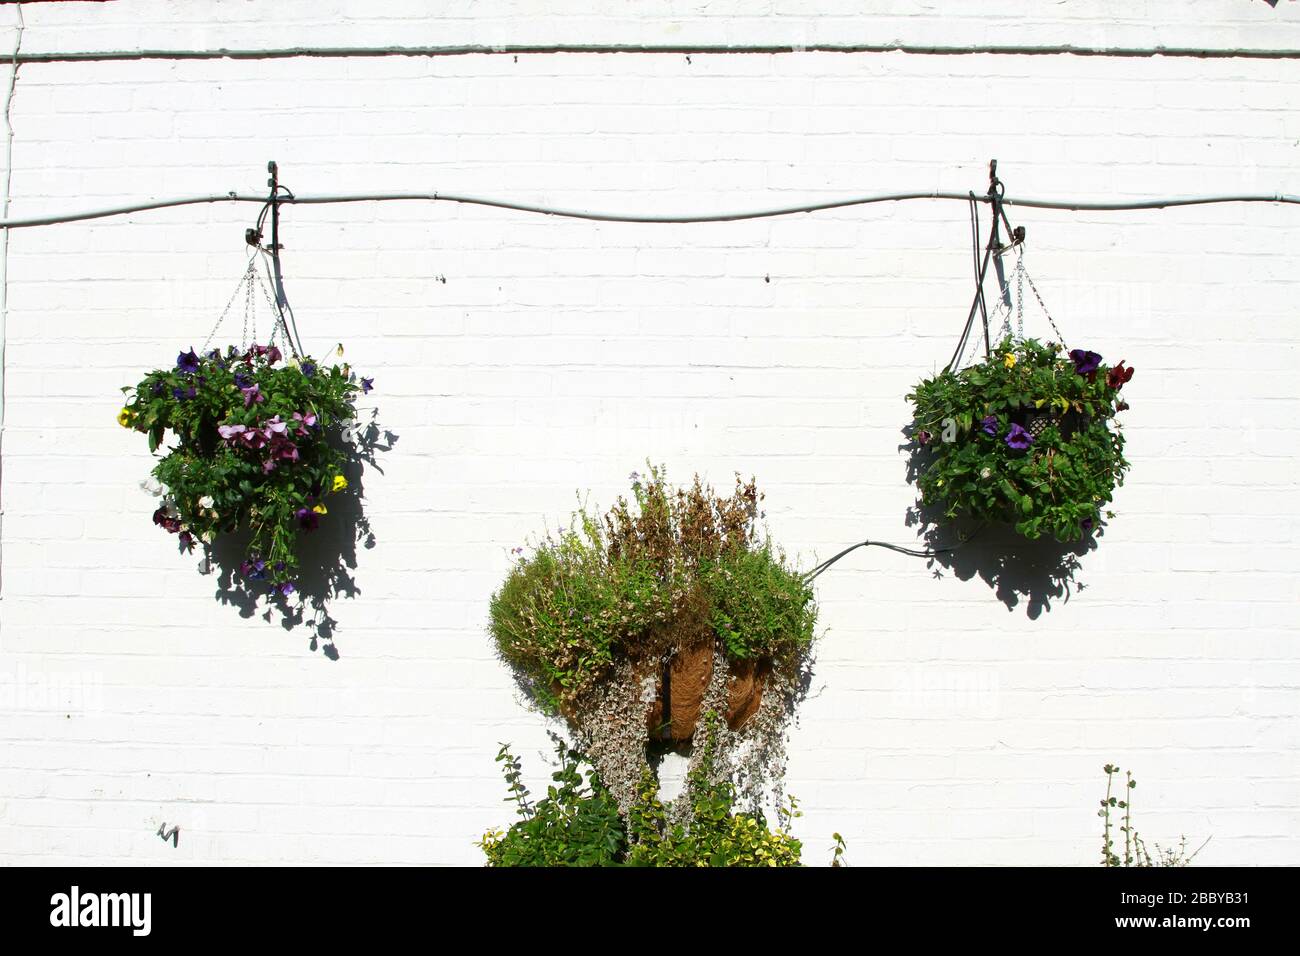 HANGING BASKETS WITH FLOWERS AND PLANTS AGAINST A WHITE PAINTED BRICK WALL. BIODIVERSITY AND REGREENING OF CITIES. CLEAN AIR. Stock Photo